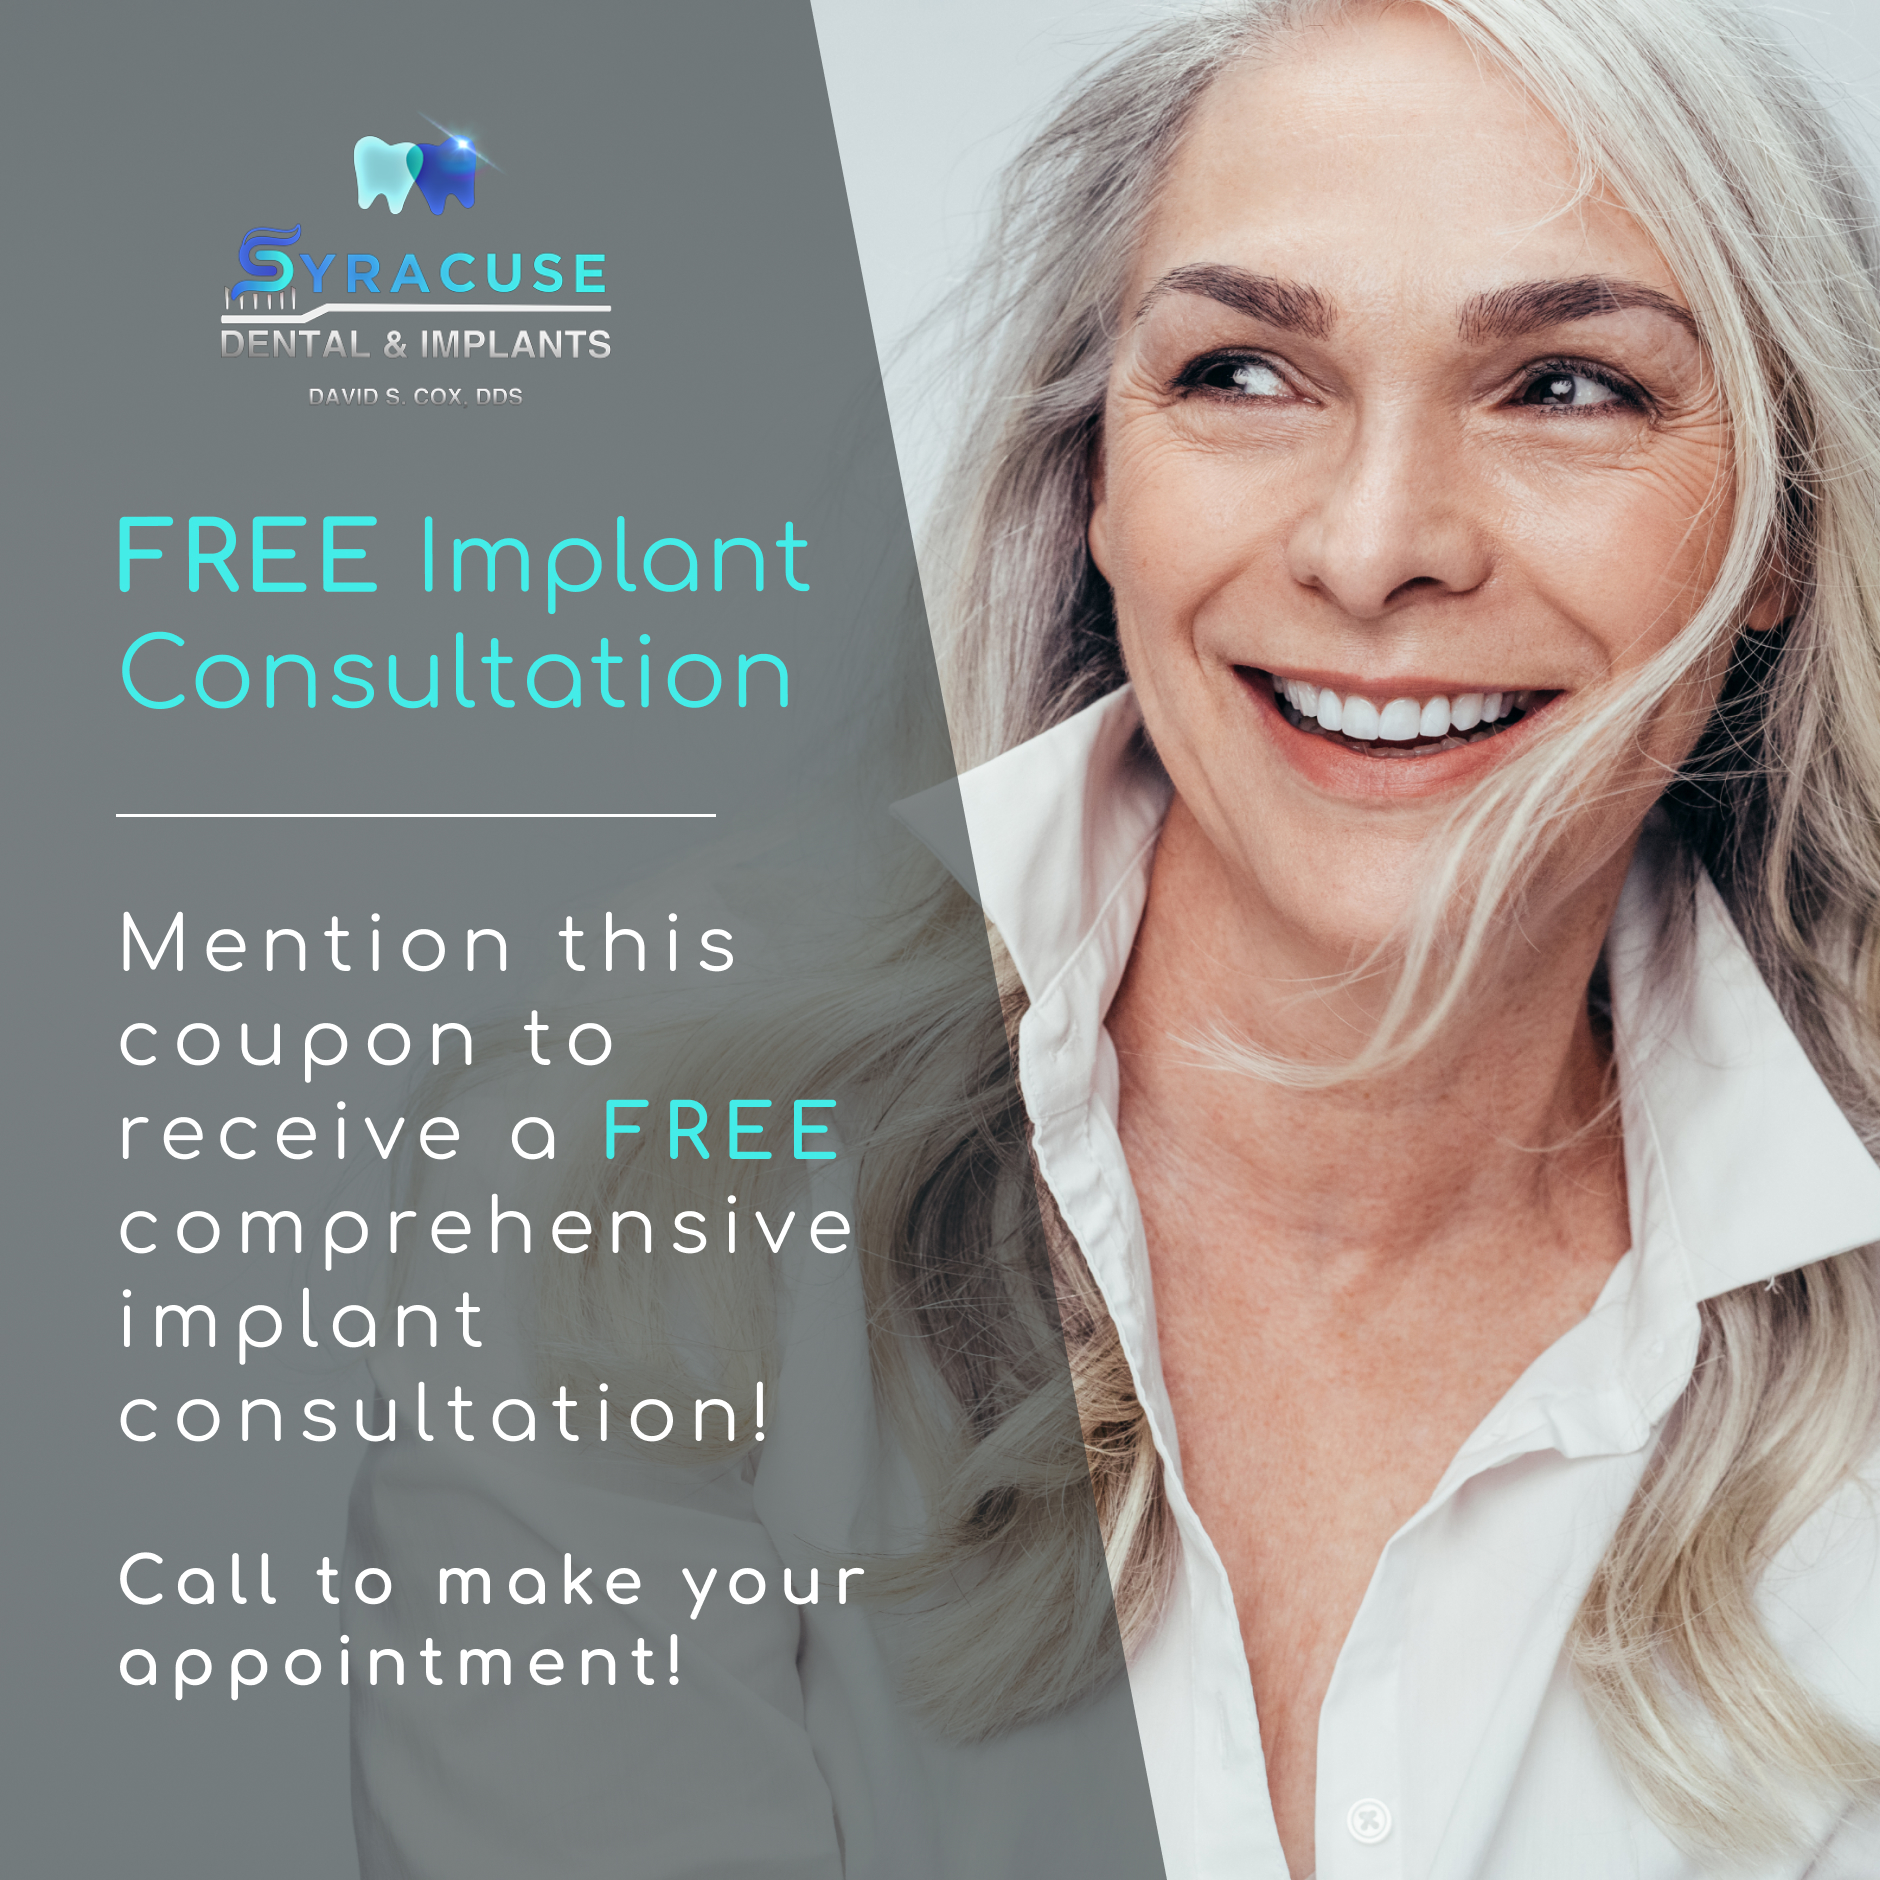 Free Implant consultation offer